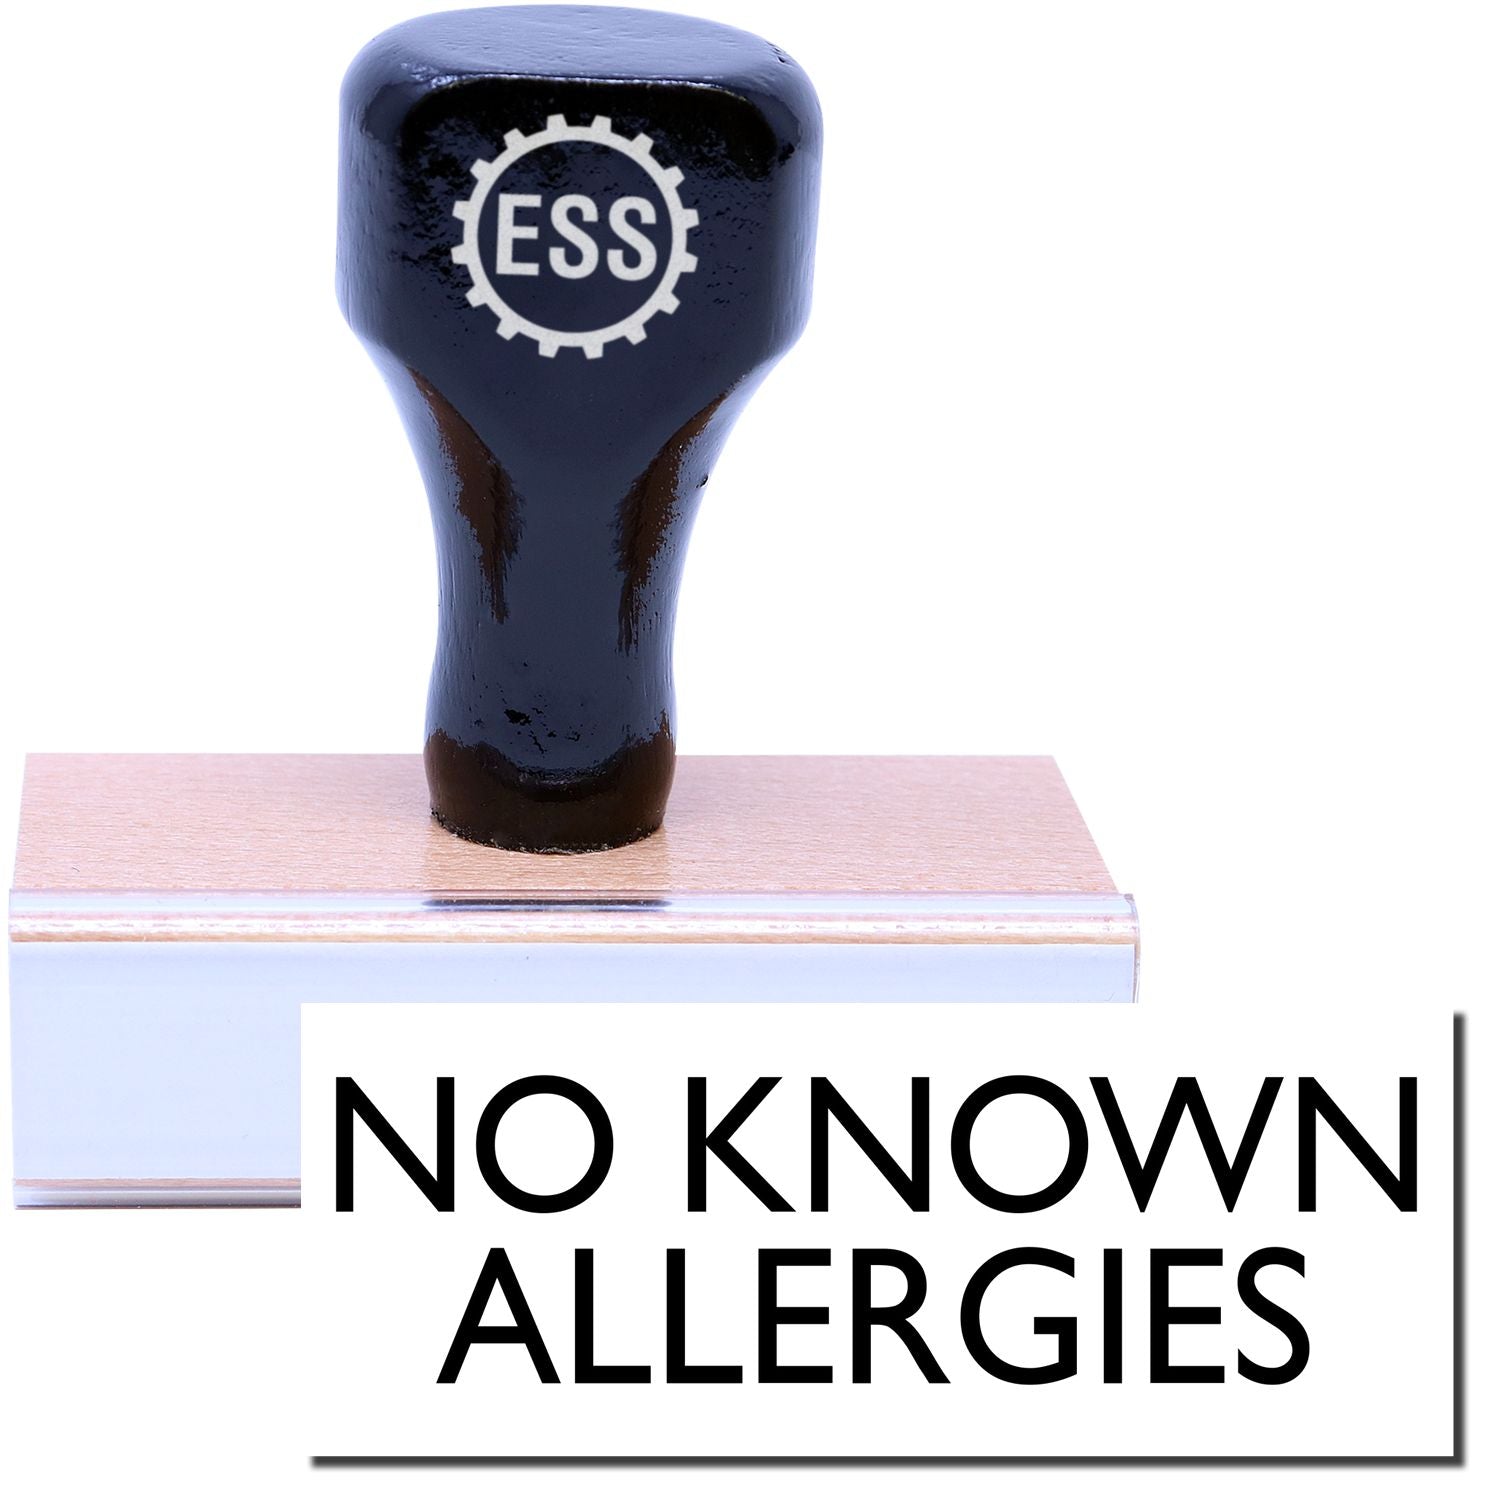 A stock office rubber stamp with a stamped image showing how the text "NO KNOWN ALLERGIES" is displayed after stamping.